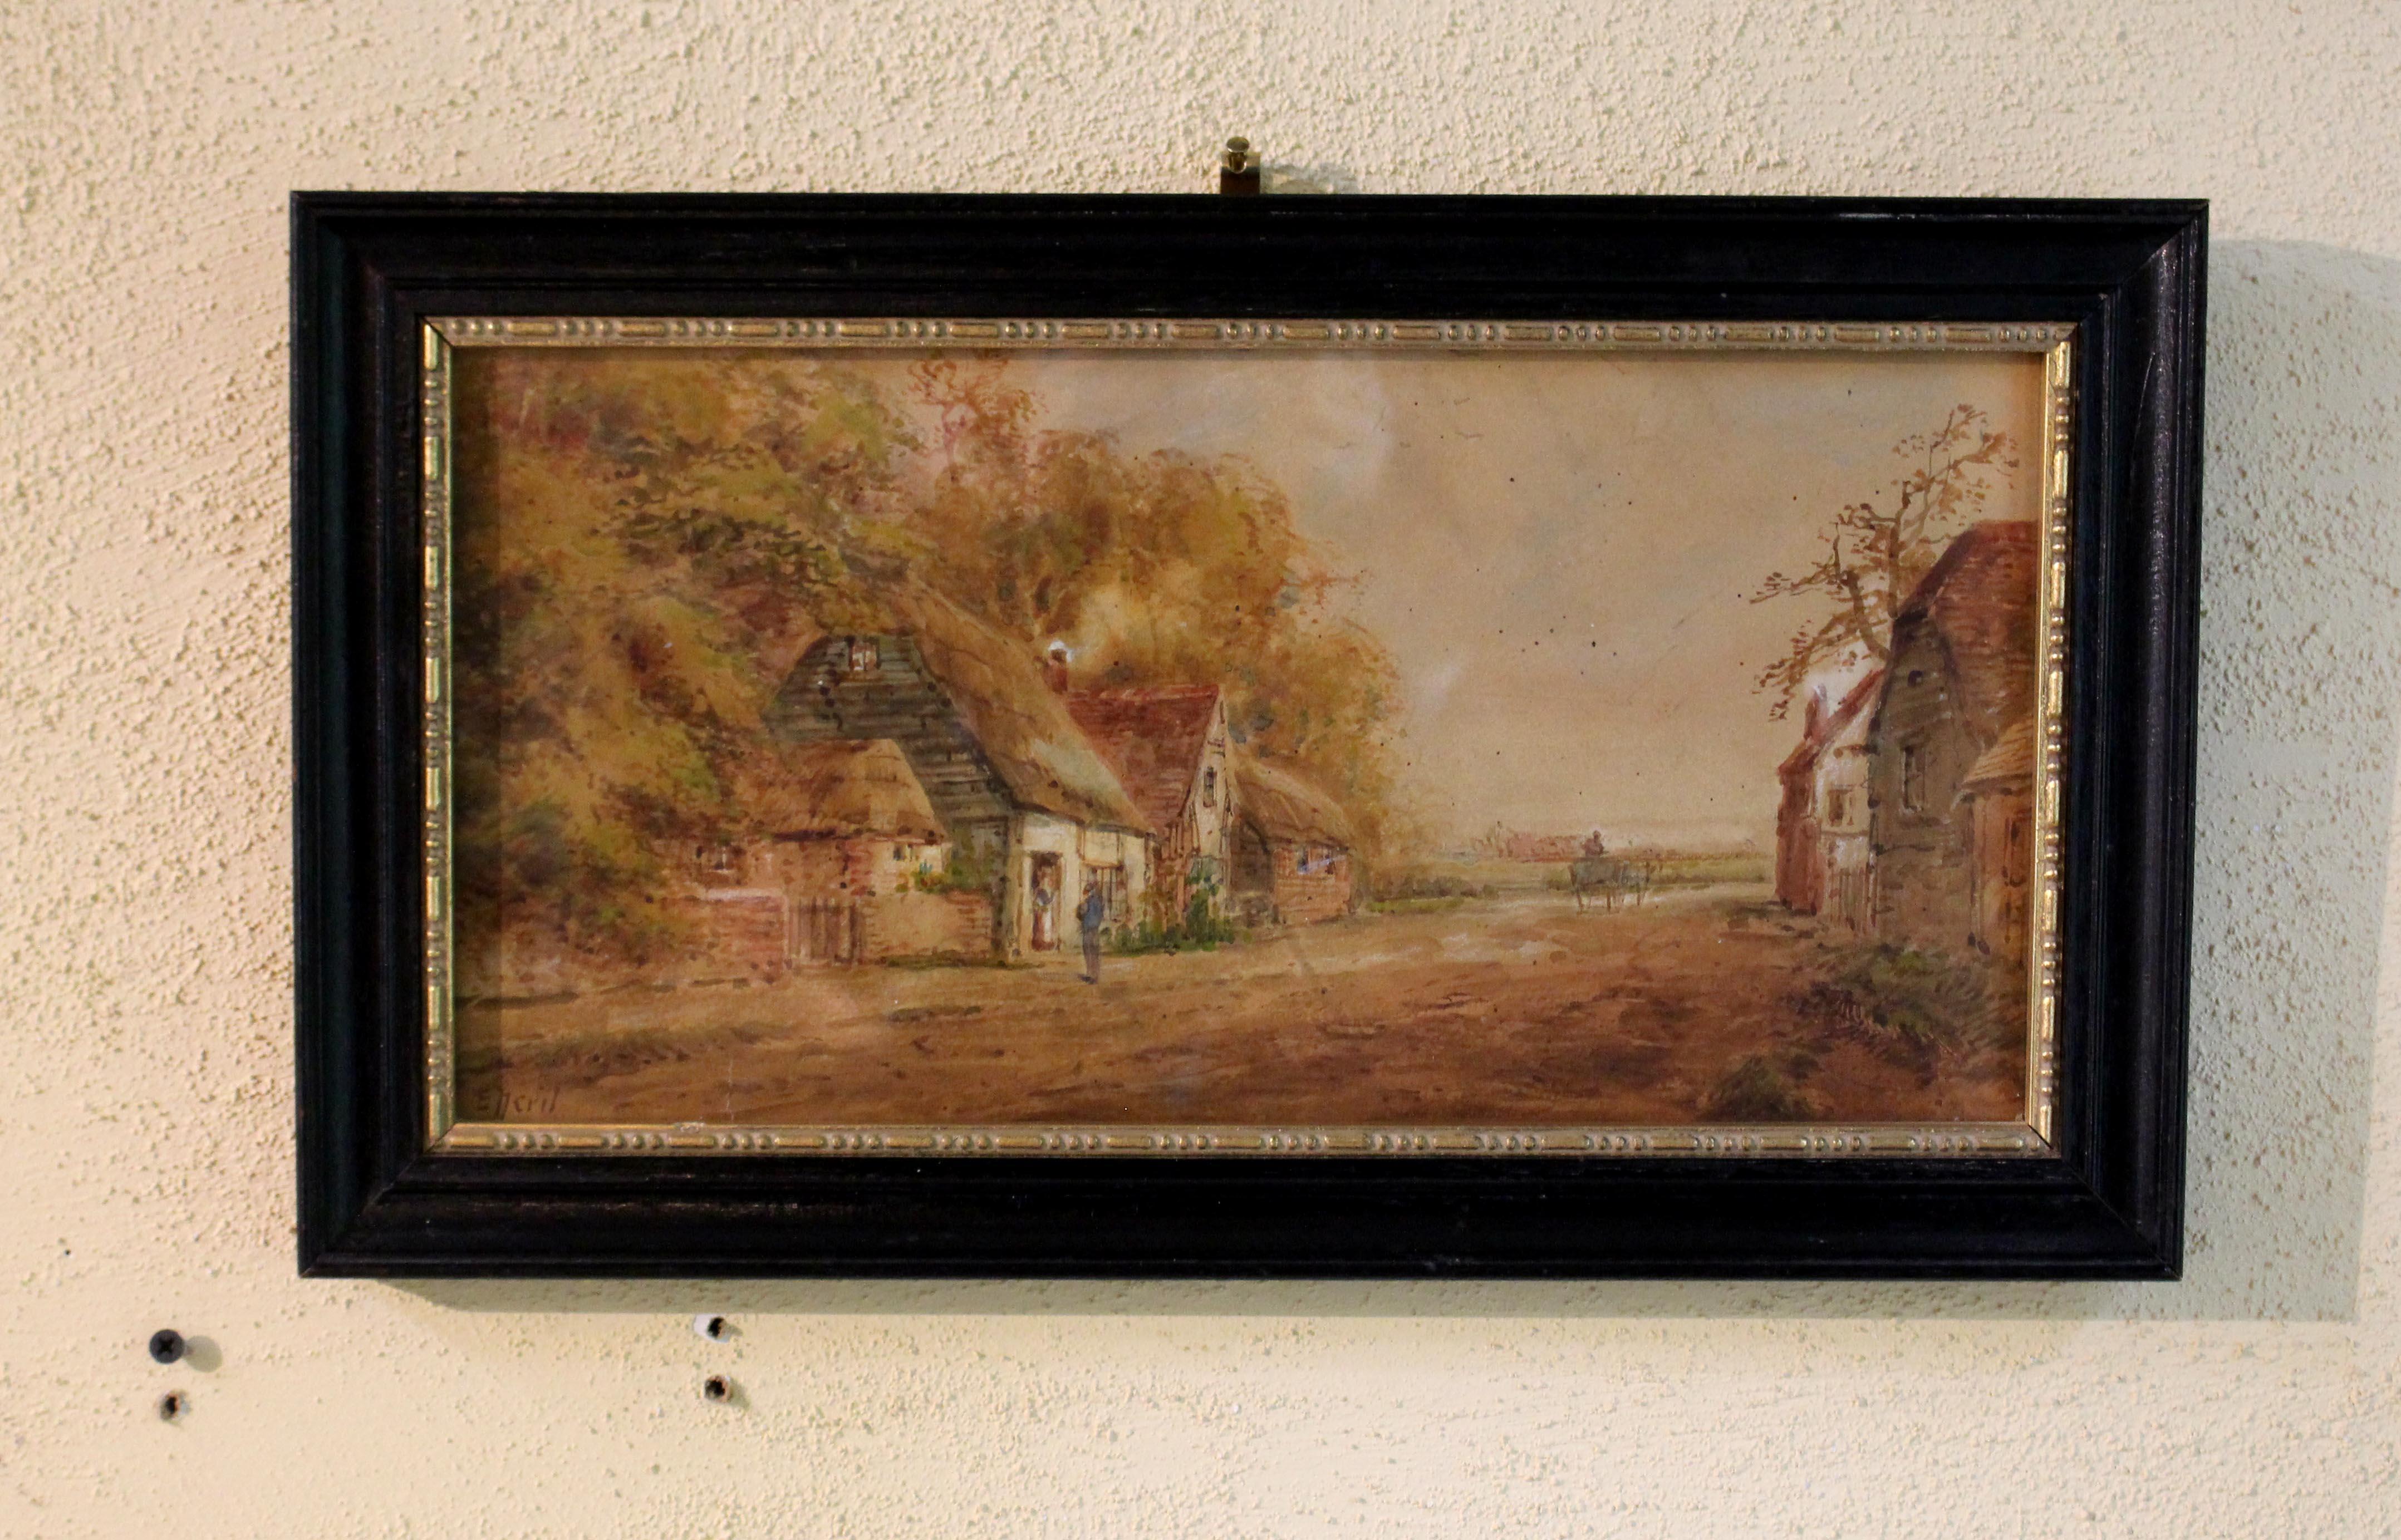 Late 19th century English watercolor by E. Nevil. A charming village scene. Signed lower left, E. Nevil (Edward Nevil, late 19th century). Not examined out of the antique frame. Sight: 6 7/8